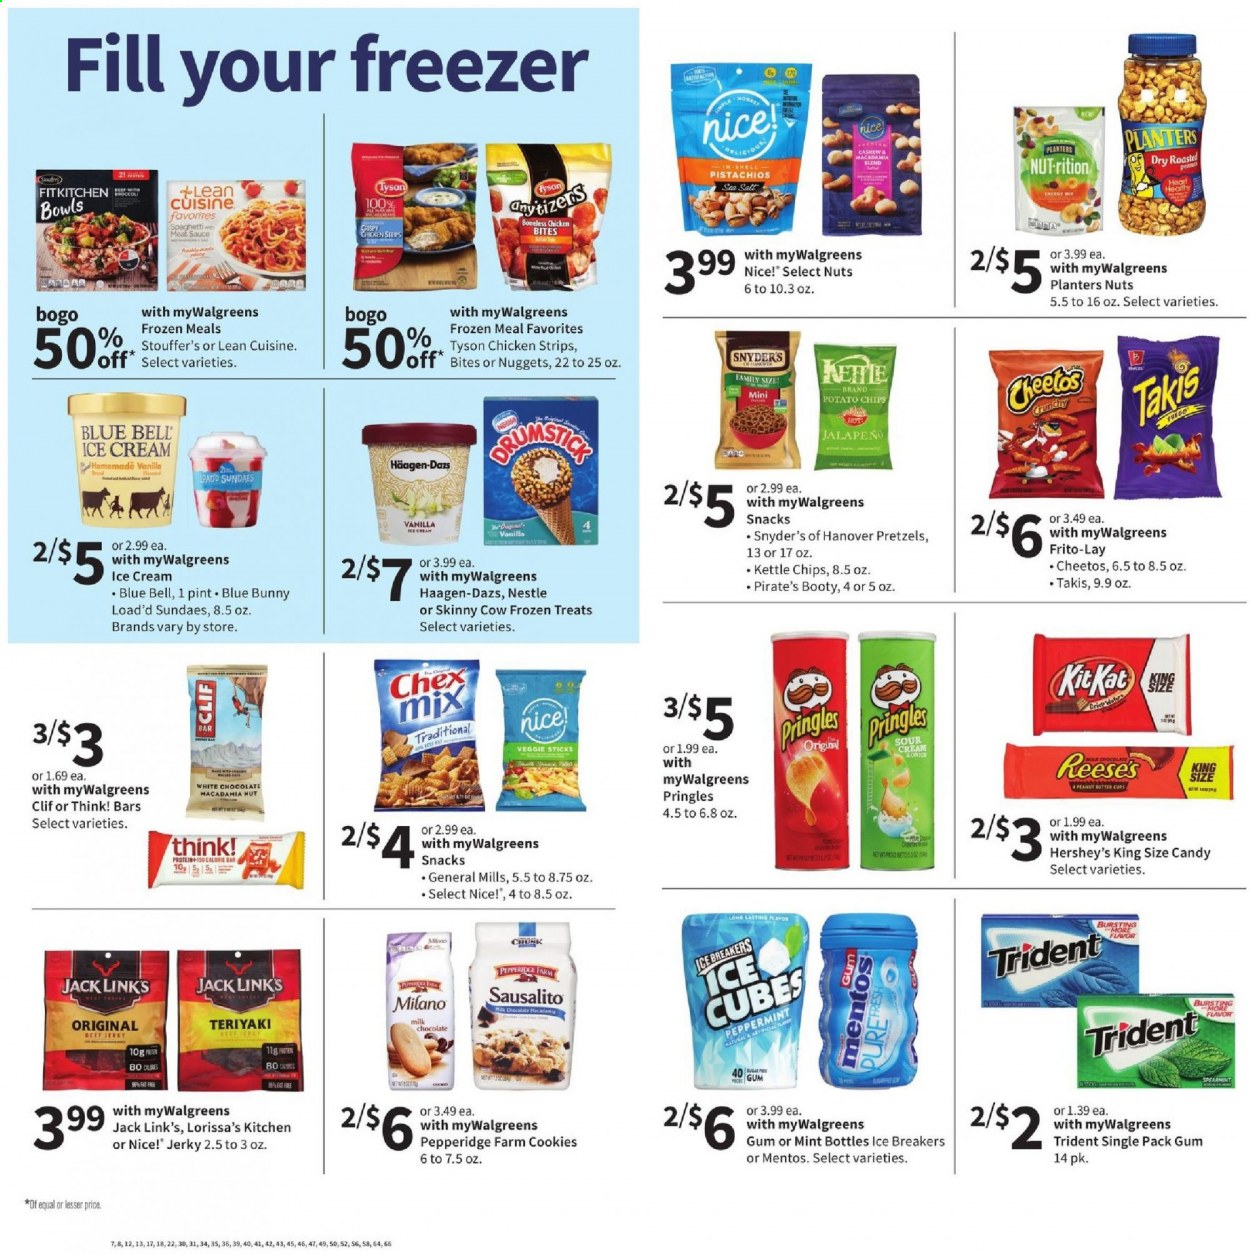 thumbnail - Walgreens Flyer - 03/07/2021 - 03/13/2021 - Sales products - pretzels, nuggets, sauce, Lean Cuisine, beef jerky, jerky, sour cream, ice cream, Reese's, Hershey's, Häagen-Dazs, ice cubes, Blue Bell, Blue Bunny, strips, chicken strips, Stouffer's, cookies, milk chocolate, Nestlé, white chocolate, chocolate, Mentos, Trident, potato chips, Pringles, Cheetos, snack, Frito-Lay, Nice!, Jack Link's, Chex Mix, jalapeño, spaghetti, cashews, macadamia nuts, pistachios, Planters. Page 4.